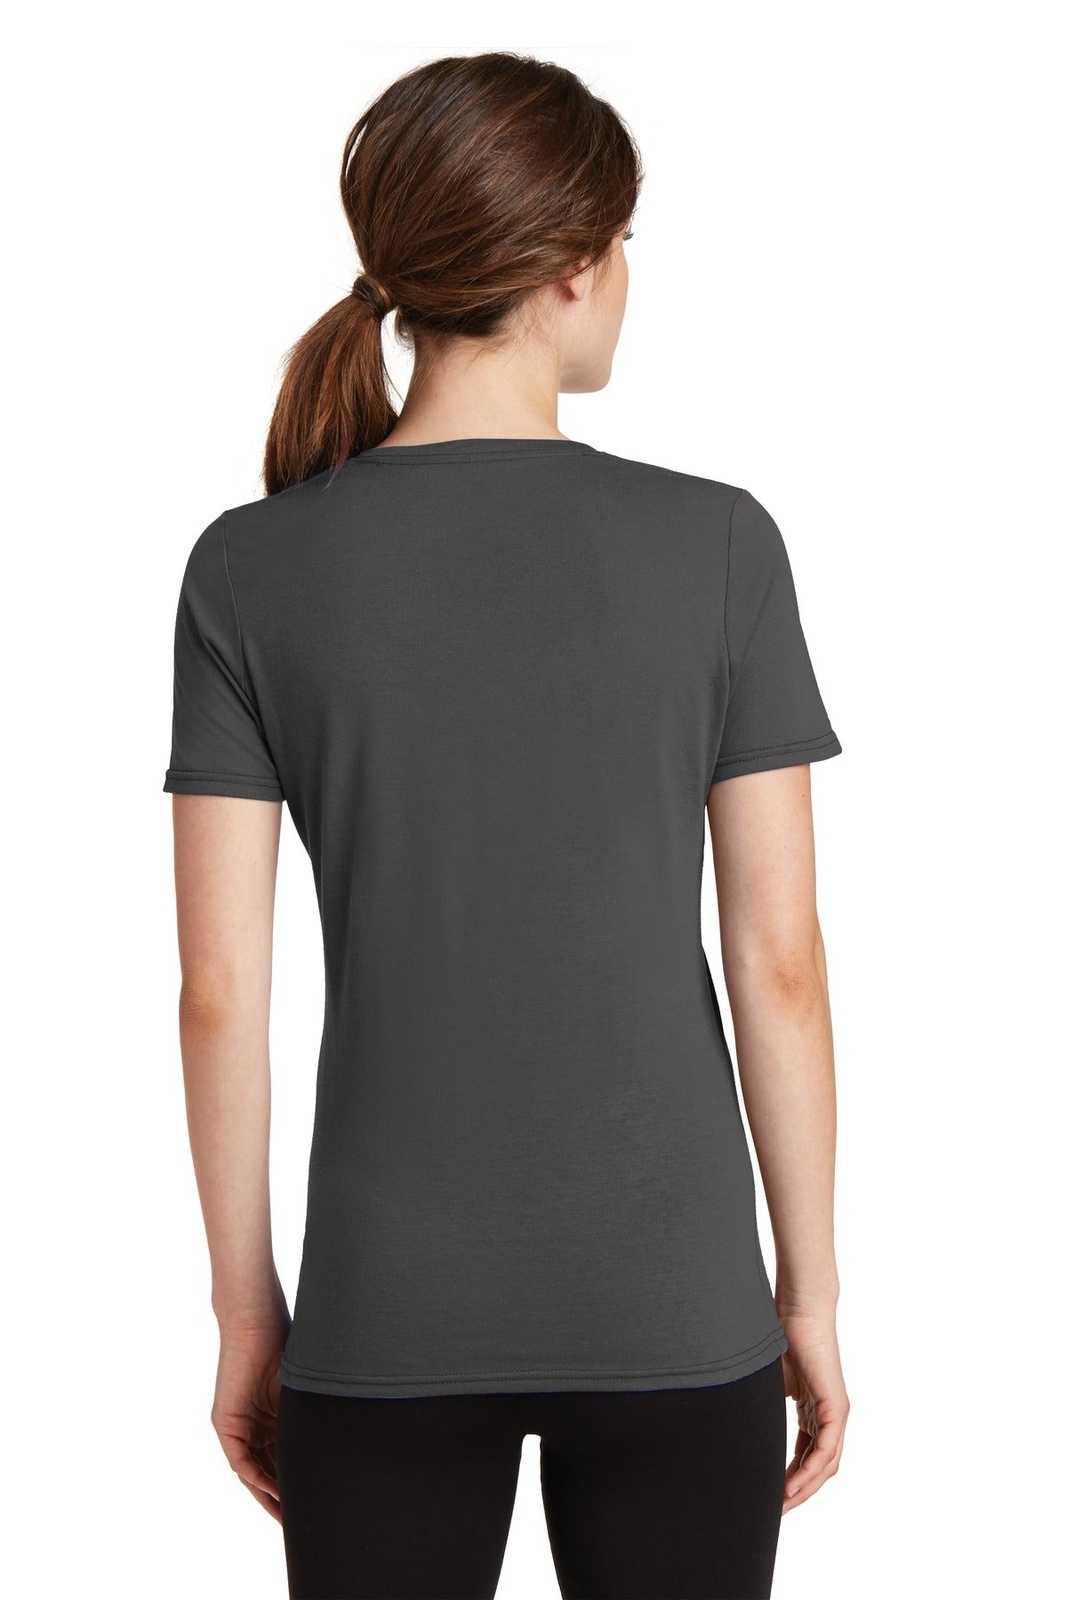 Port &amp; Company LPC381V Ladies Performance Blend V-Neck Tee - Charcoal - HIT a Double - 2